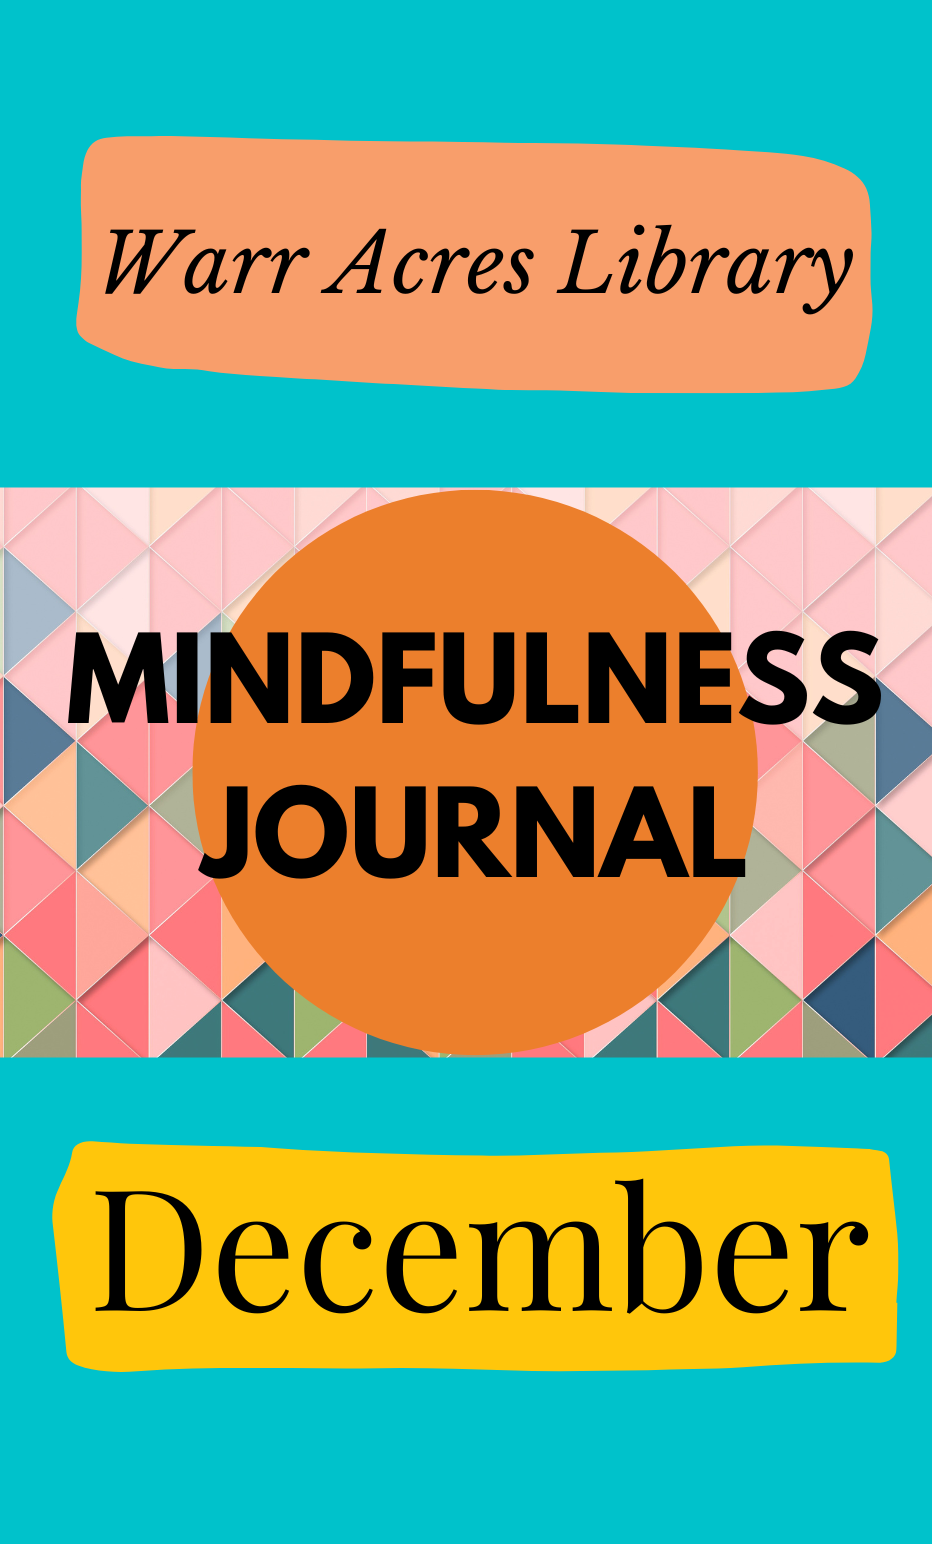 A colorful cover that says, "Warr Acres Library Mindfulness Journal December."